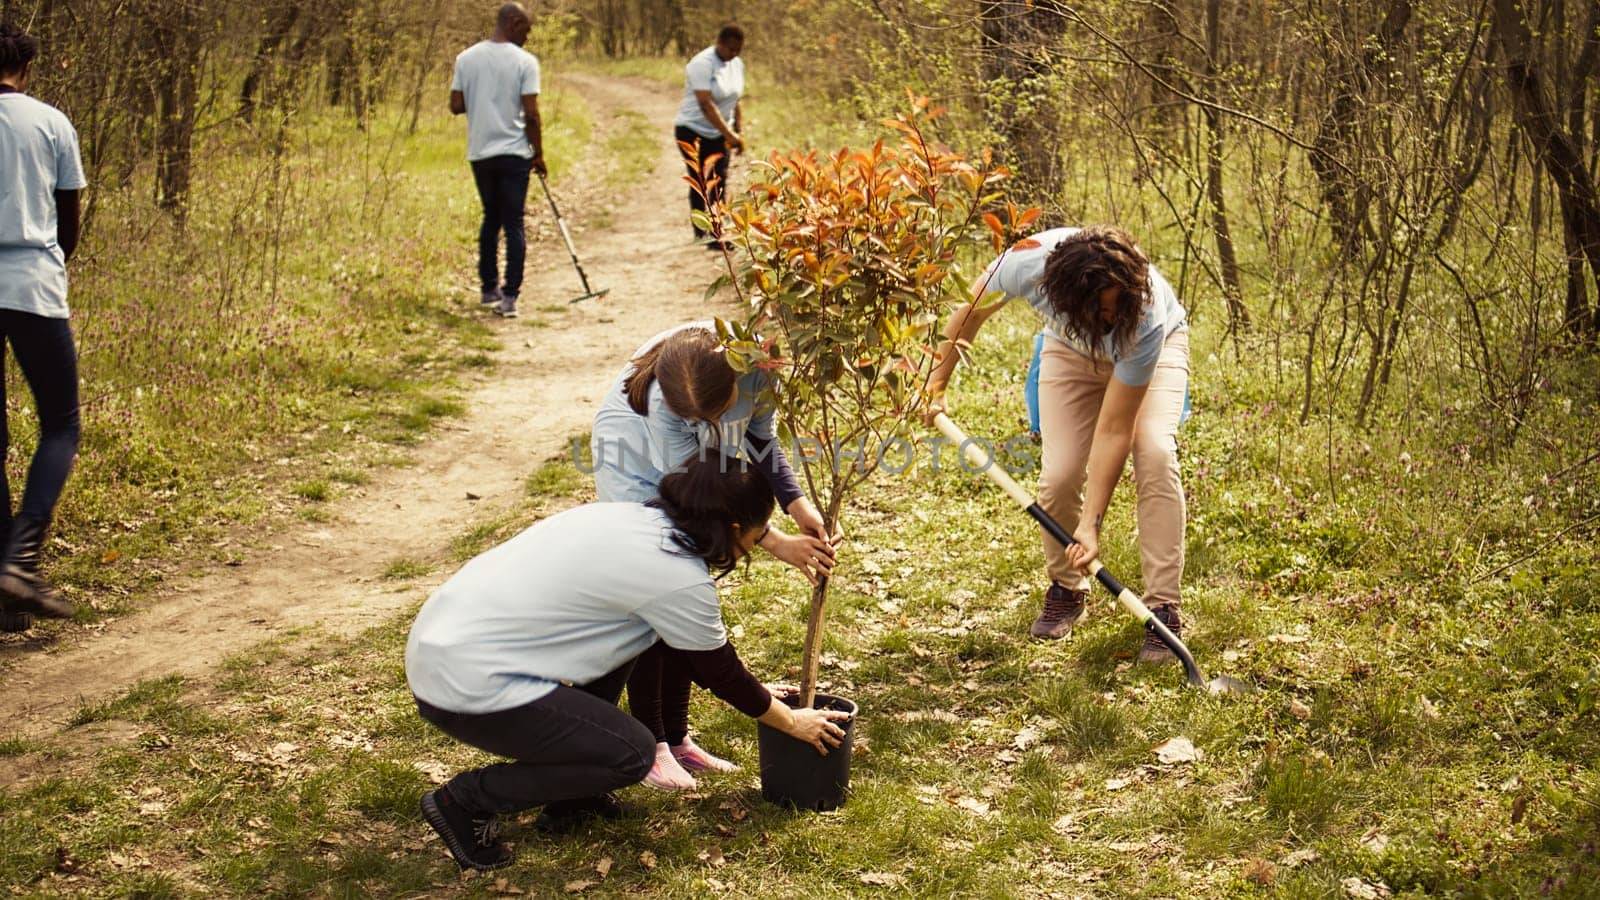 Climate activists planting new trees in a woodland ecosystem by DCStudio